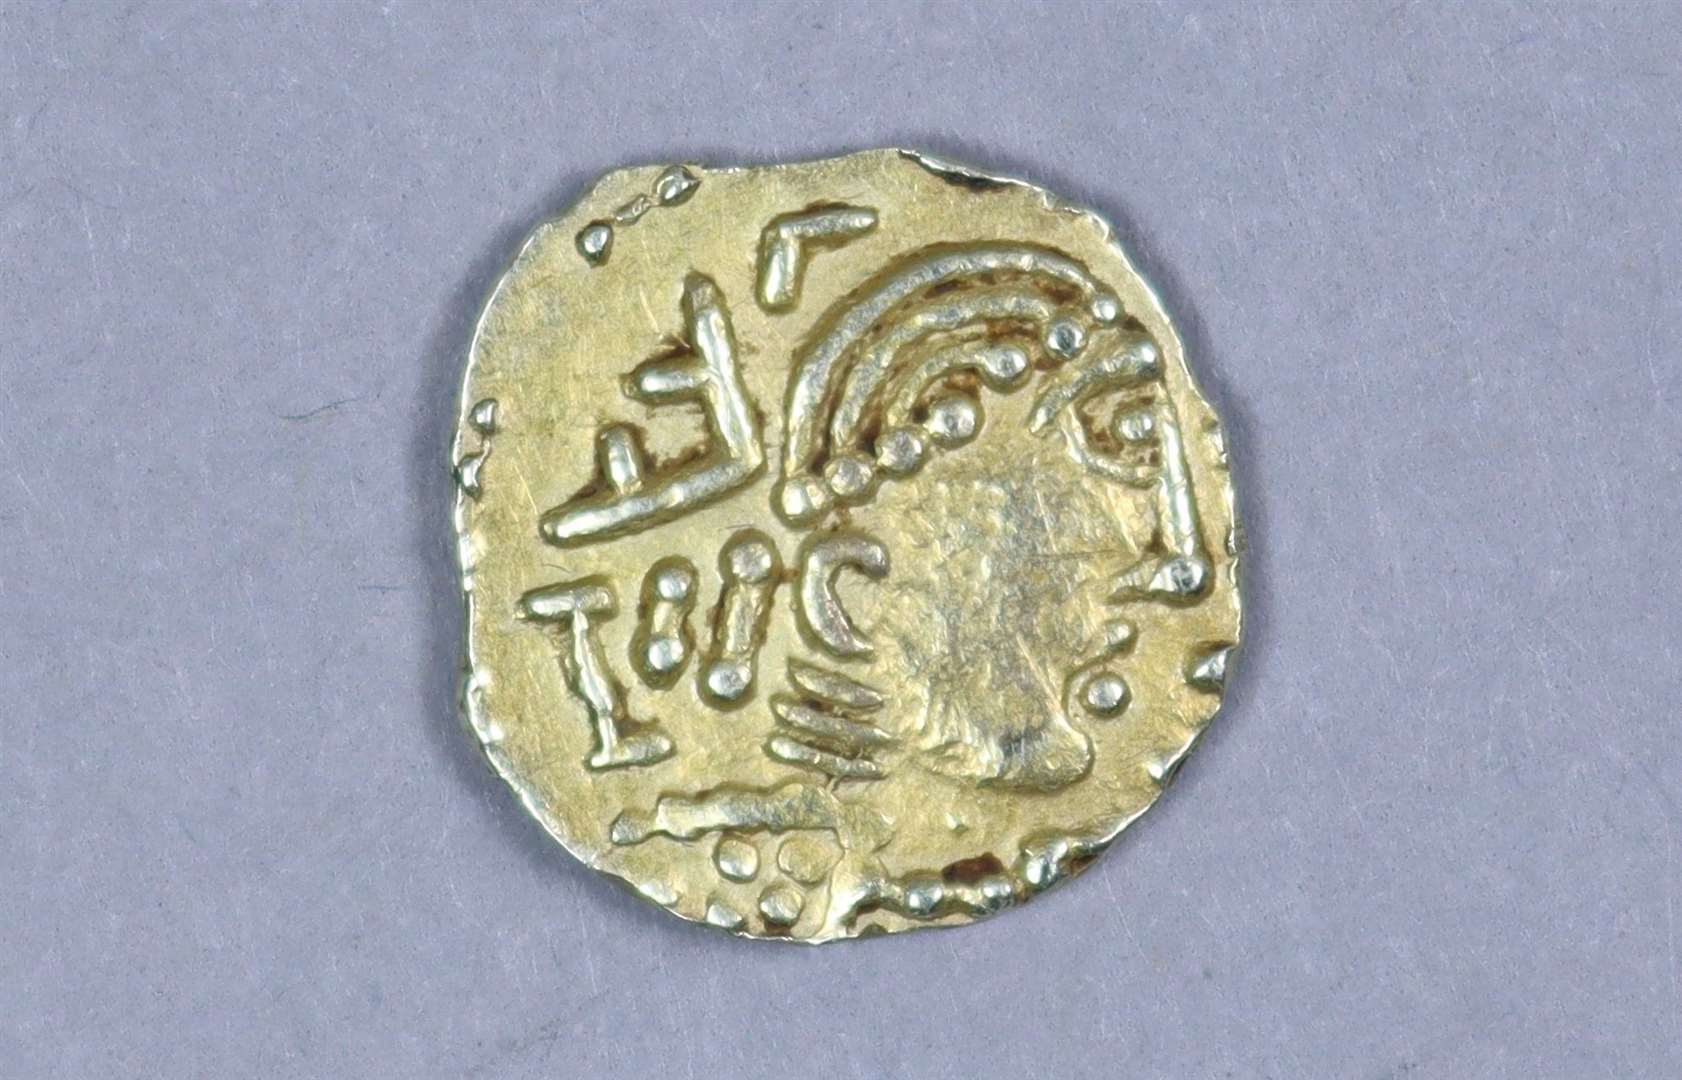 A gold shilling showing the emperor with a diademed bust is estimated at £8,000-£10,000